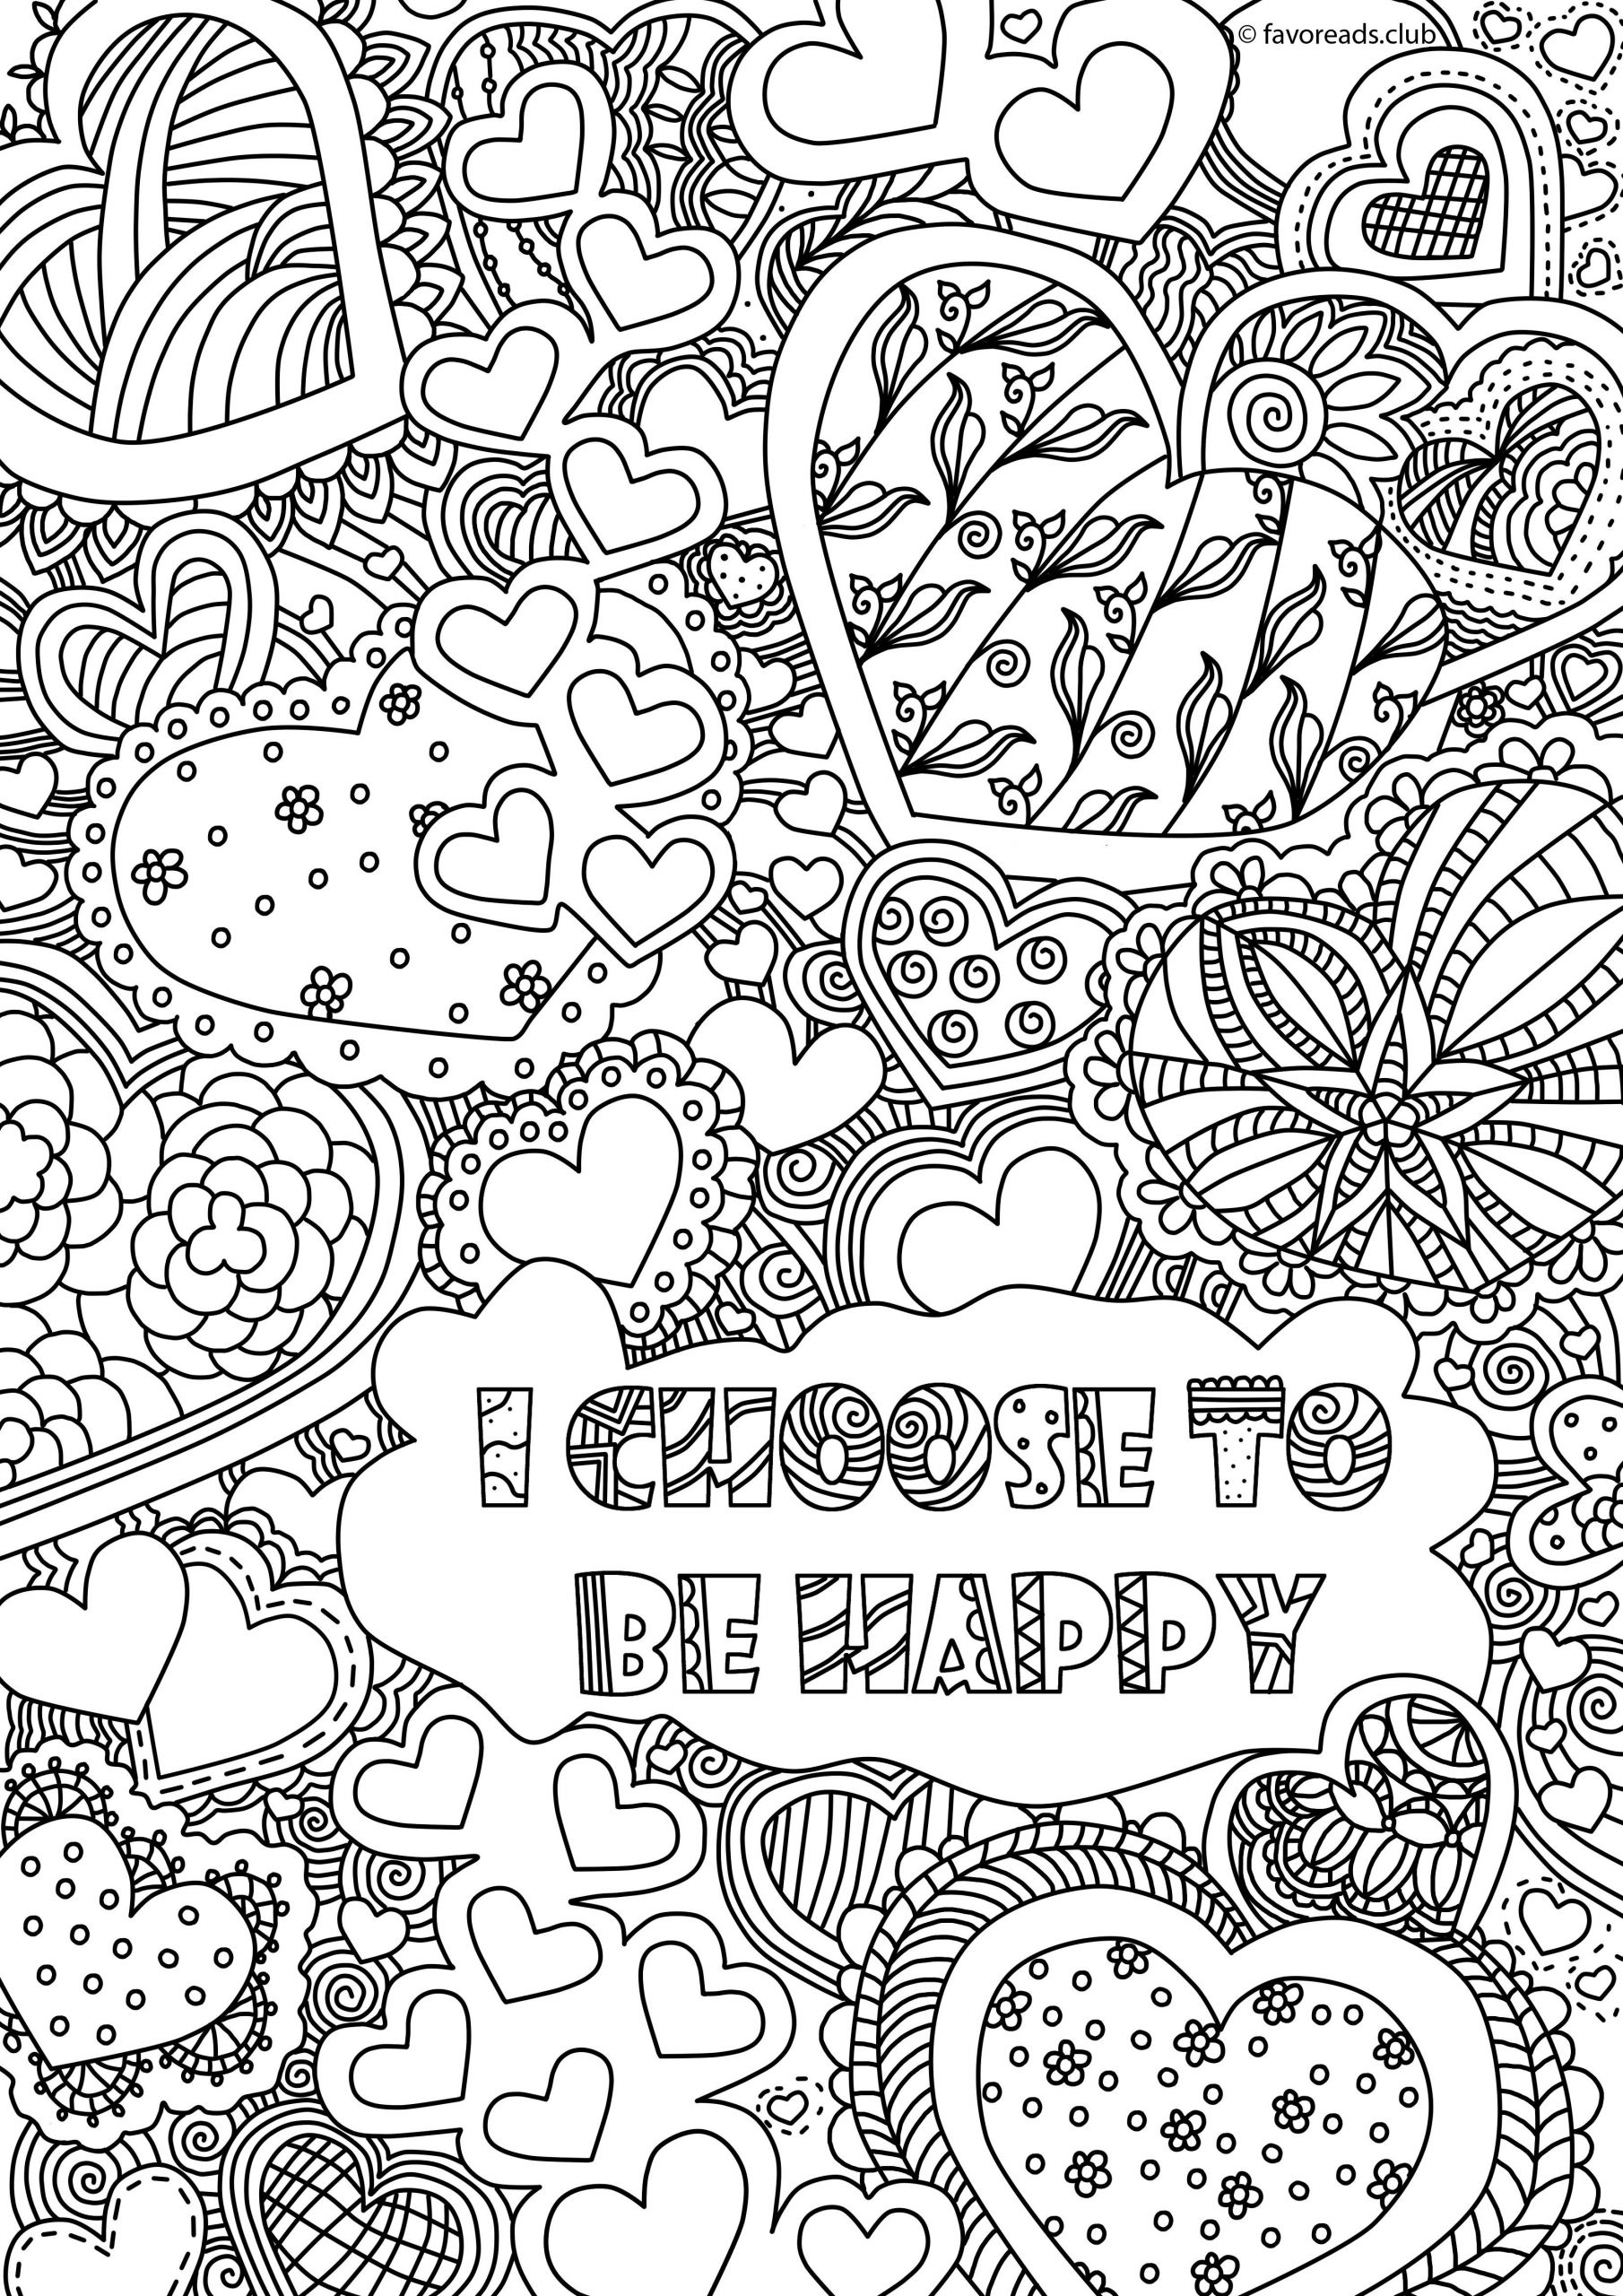 Printable Adult Coloring Pages Quotes
 Pin by Dallas Goodwin on ADULT COLORING PAGES